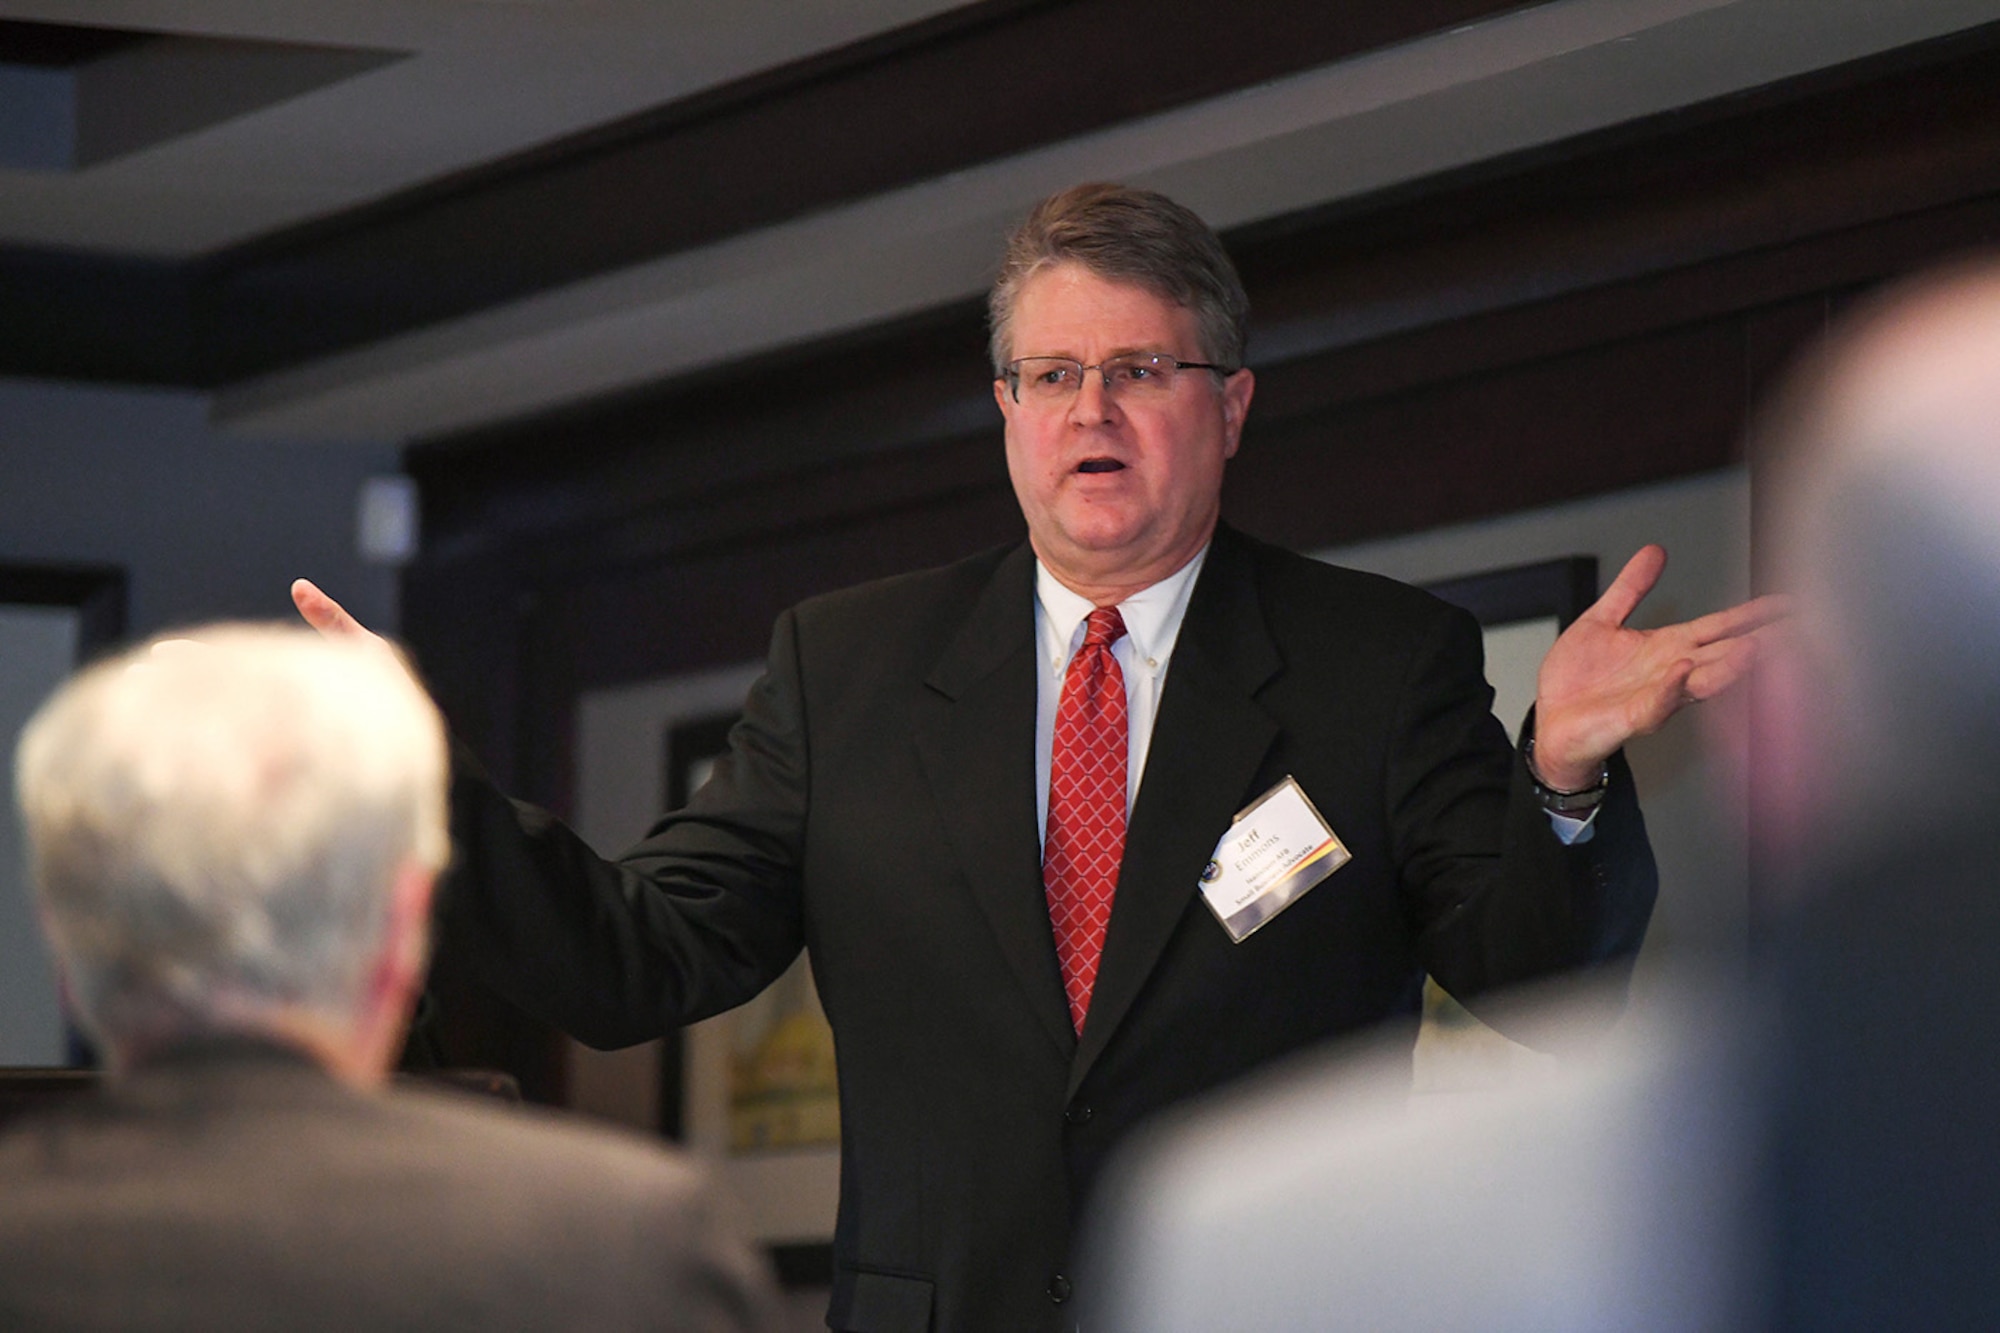 Jeff Emmons, director of Small Business Programs for Hanscom Air Force Base, Mass., speaks to attendees during a Hanscom Representatives Association meeting in Lexington, Mass., in April 2018. In fiscal year 2021, the Command, Control, Communications, Intelligence and Networks Directorate; Digital Directorate; and the Nuclear Command, Control and Communications Integration Directorate awarded over $1.4 billion to small businesses, exceeding their combined goal of $840 million. (U.S. Air Force photo by Todd Maki)